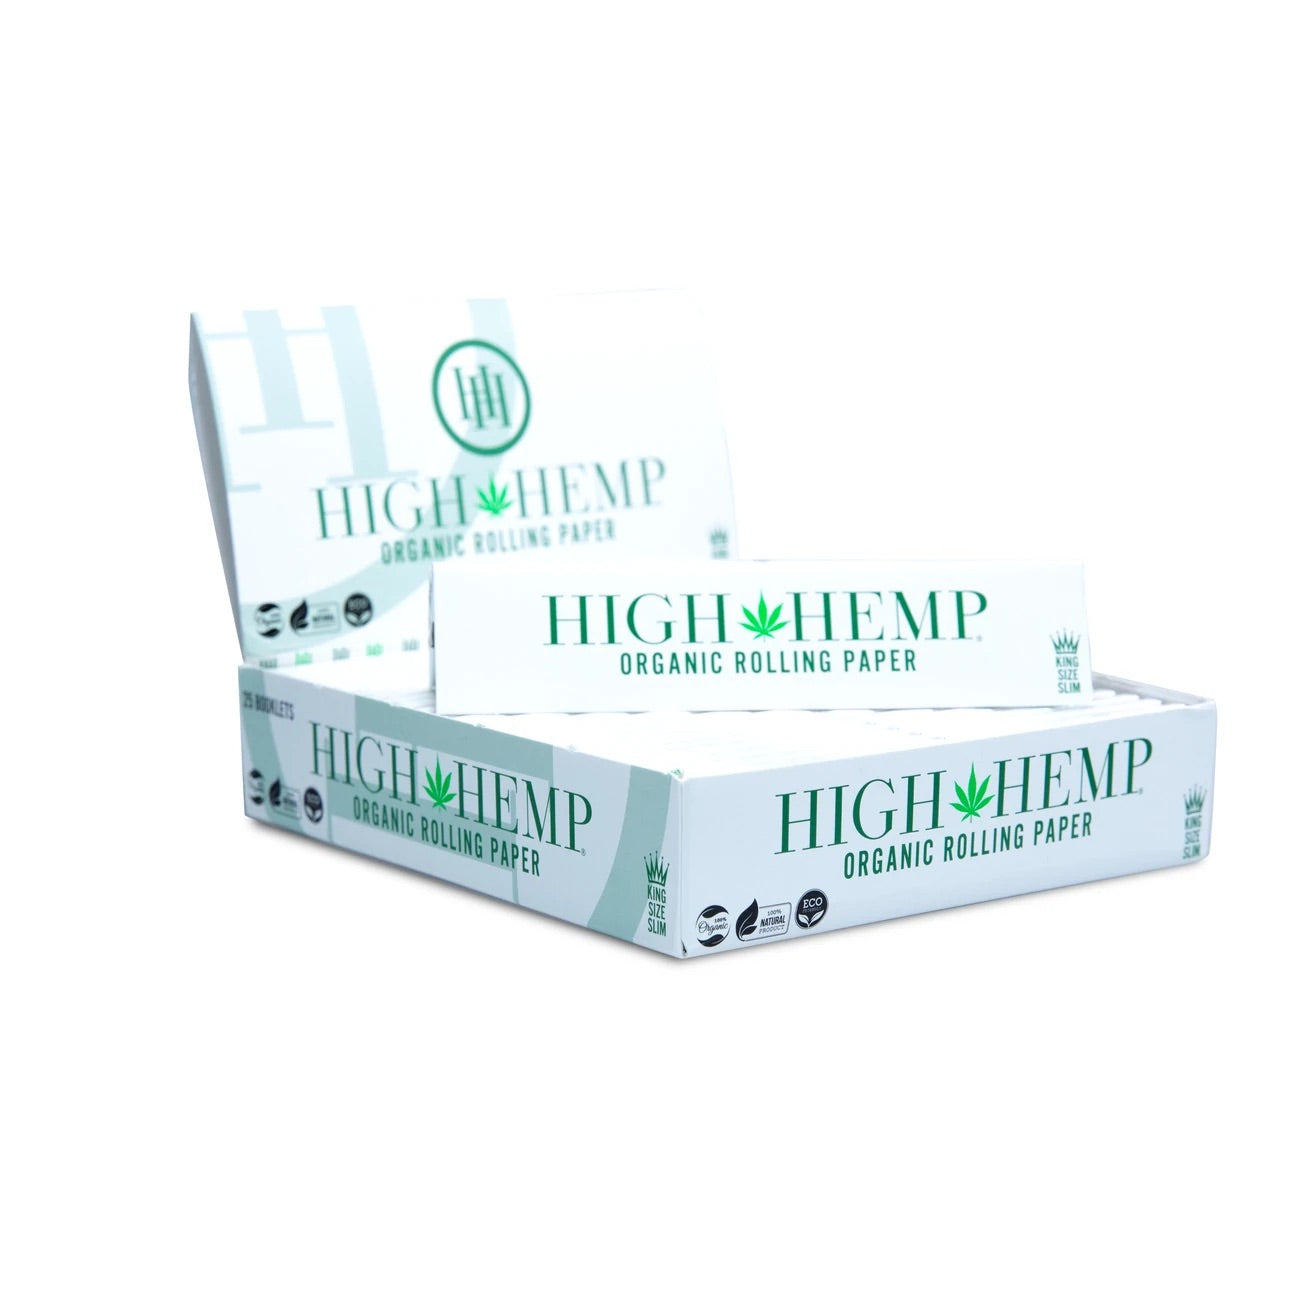 HIGH HEMP Rolling Paper King Size Slim yoga smokes yoga studio, delivery, delivery near me, yoga smokes smoke shop, find smoke shop, head shop near me, yoga studio, headshop, head shop, local smoke shop, psl, psl smoke shop, smoke shop, smokeshop, yoga, yoga studio, dispensary, local dispensary, smokeshop near me, port saint lucie, florida, port st lucie, lounge, life, highlife, love, stoned, highsociety. Yoga Smokes